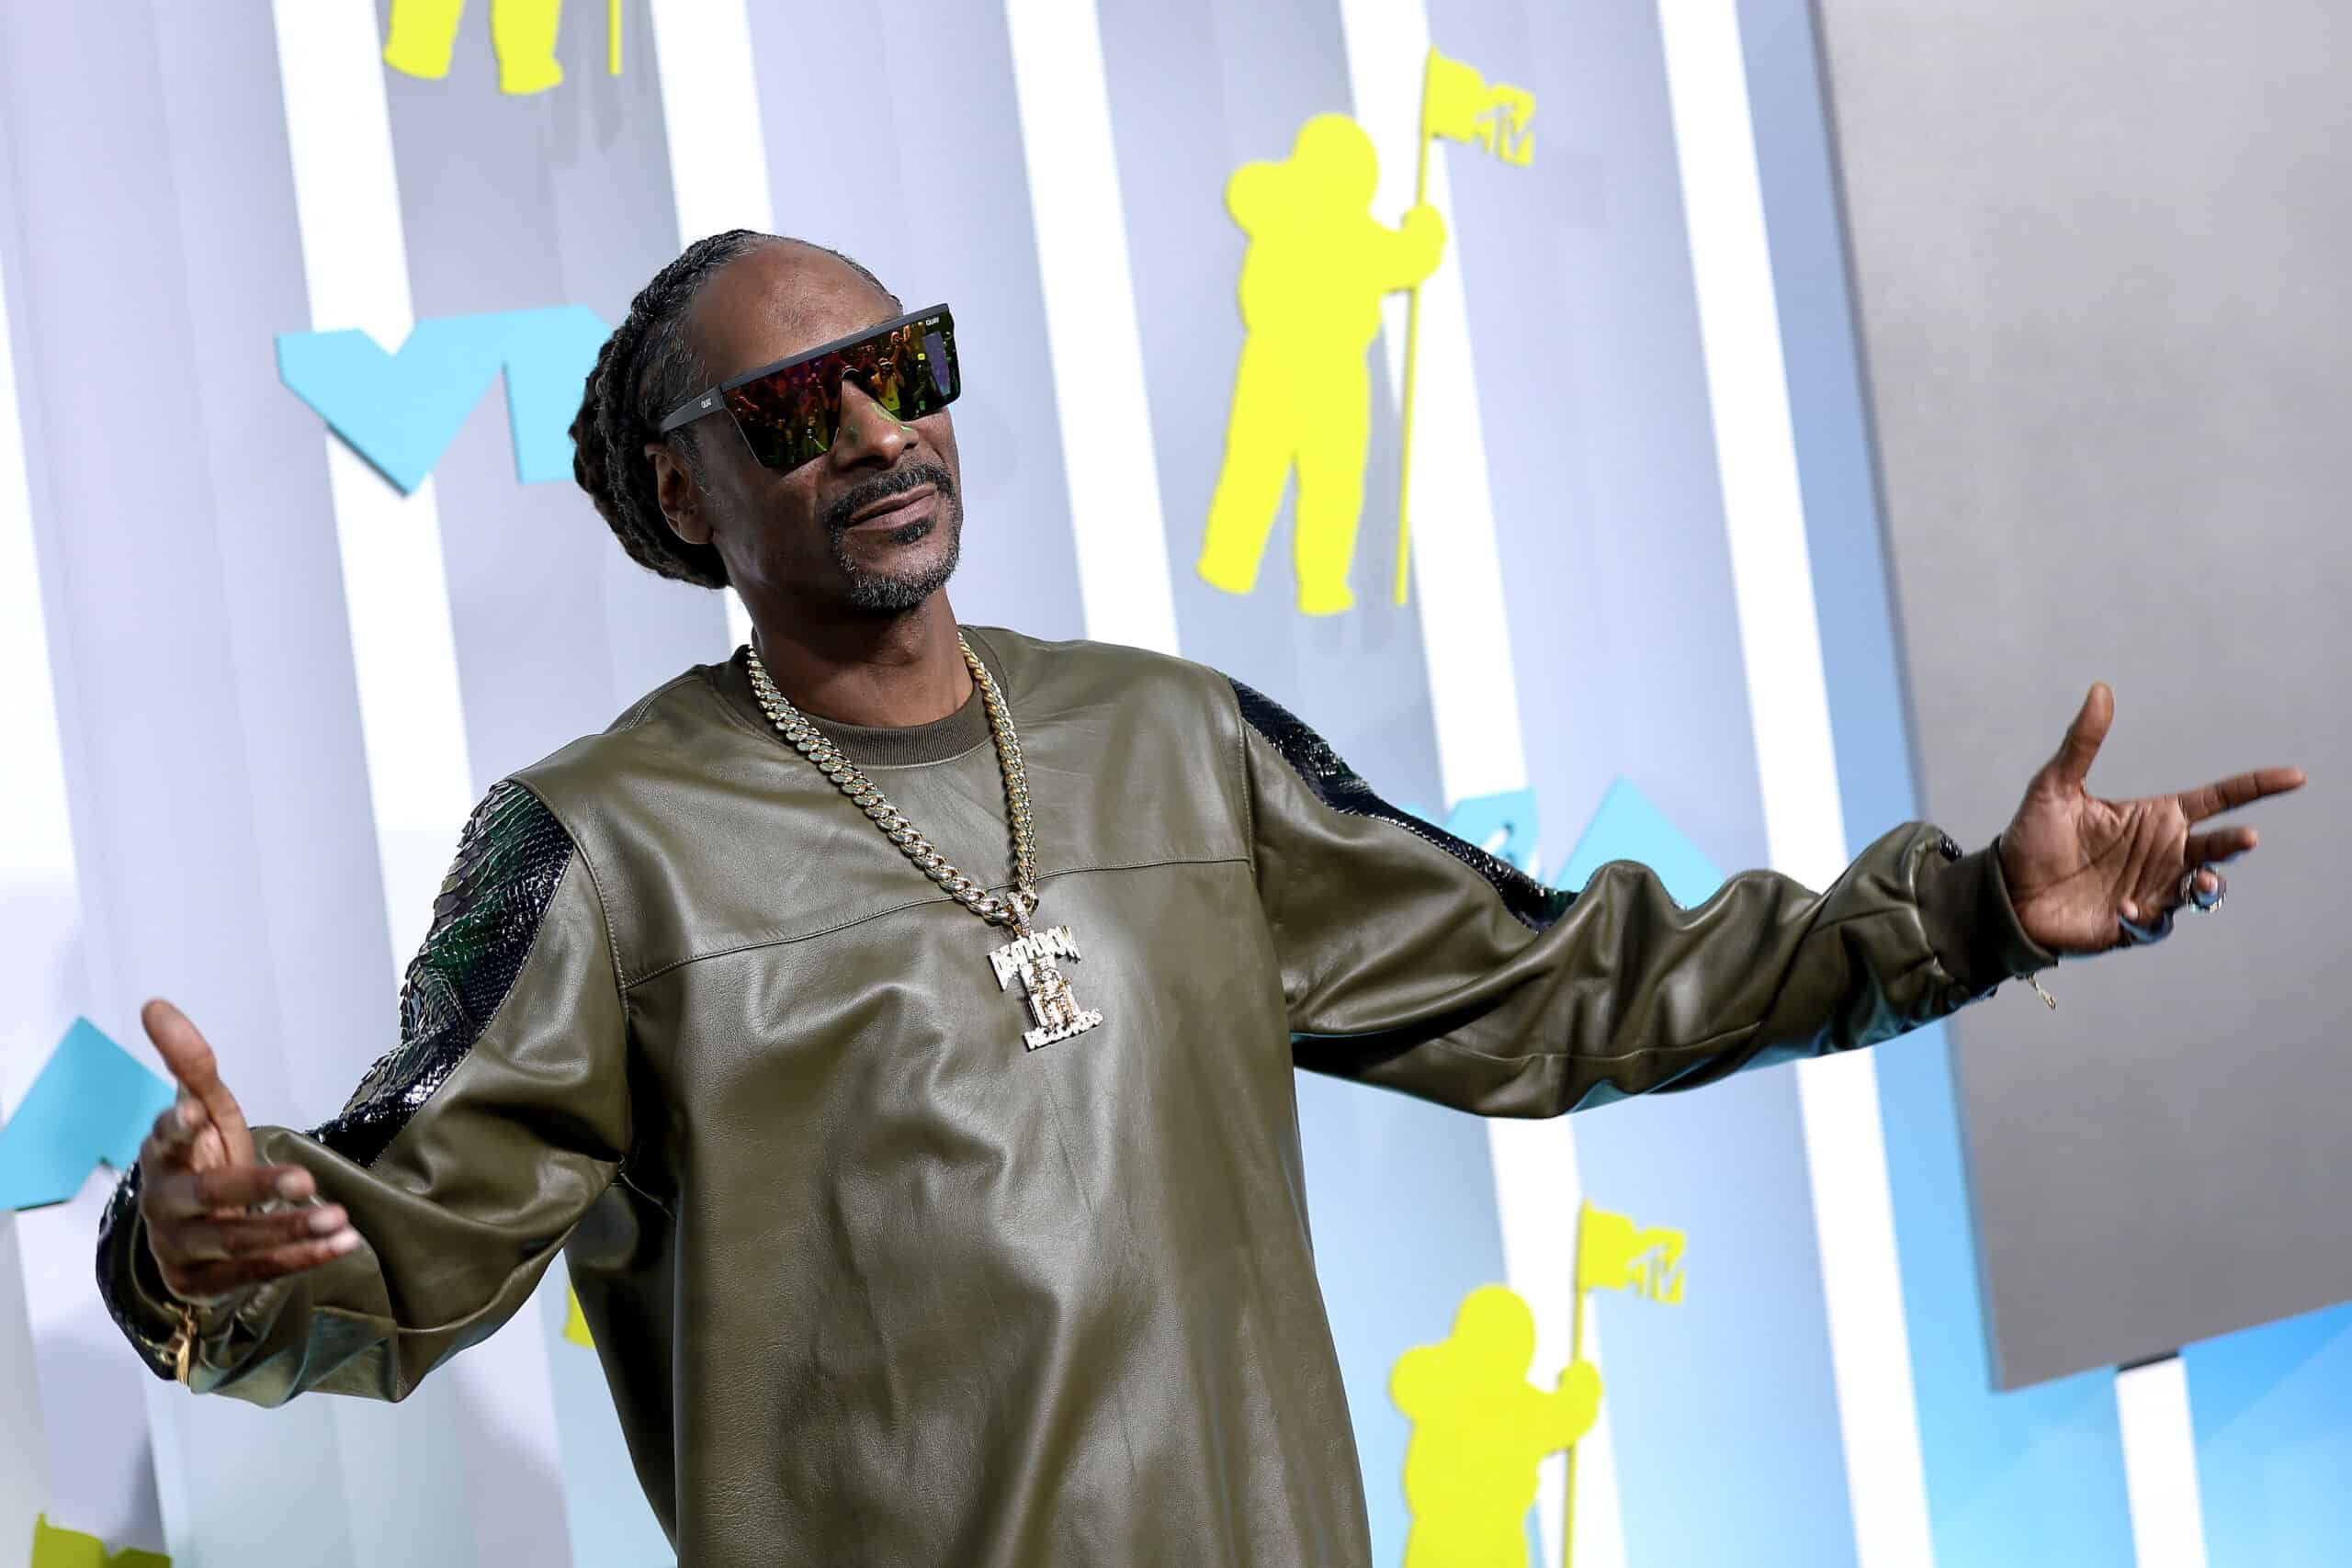 Snoop Dogg IS NOT Giving Up Smoking Weed, He's Selling Smokeless Fire Pits